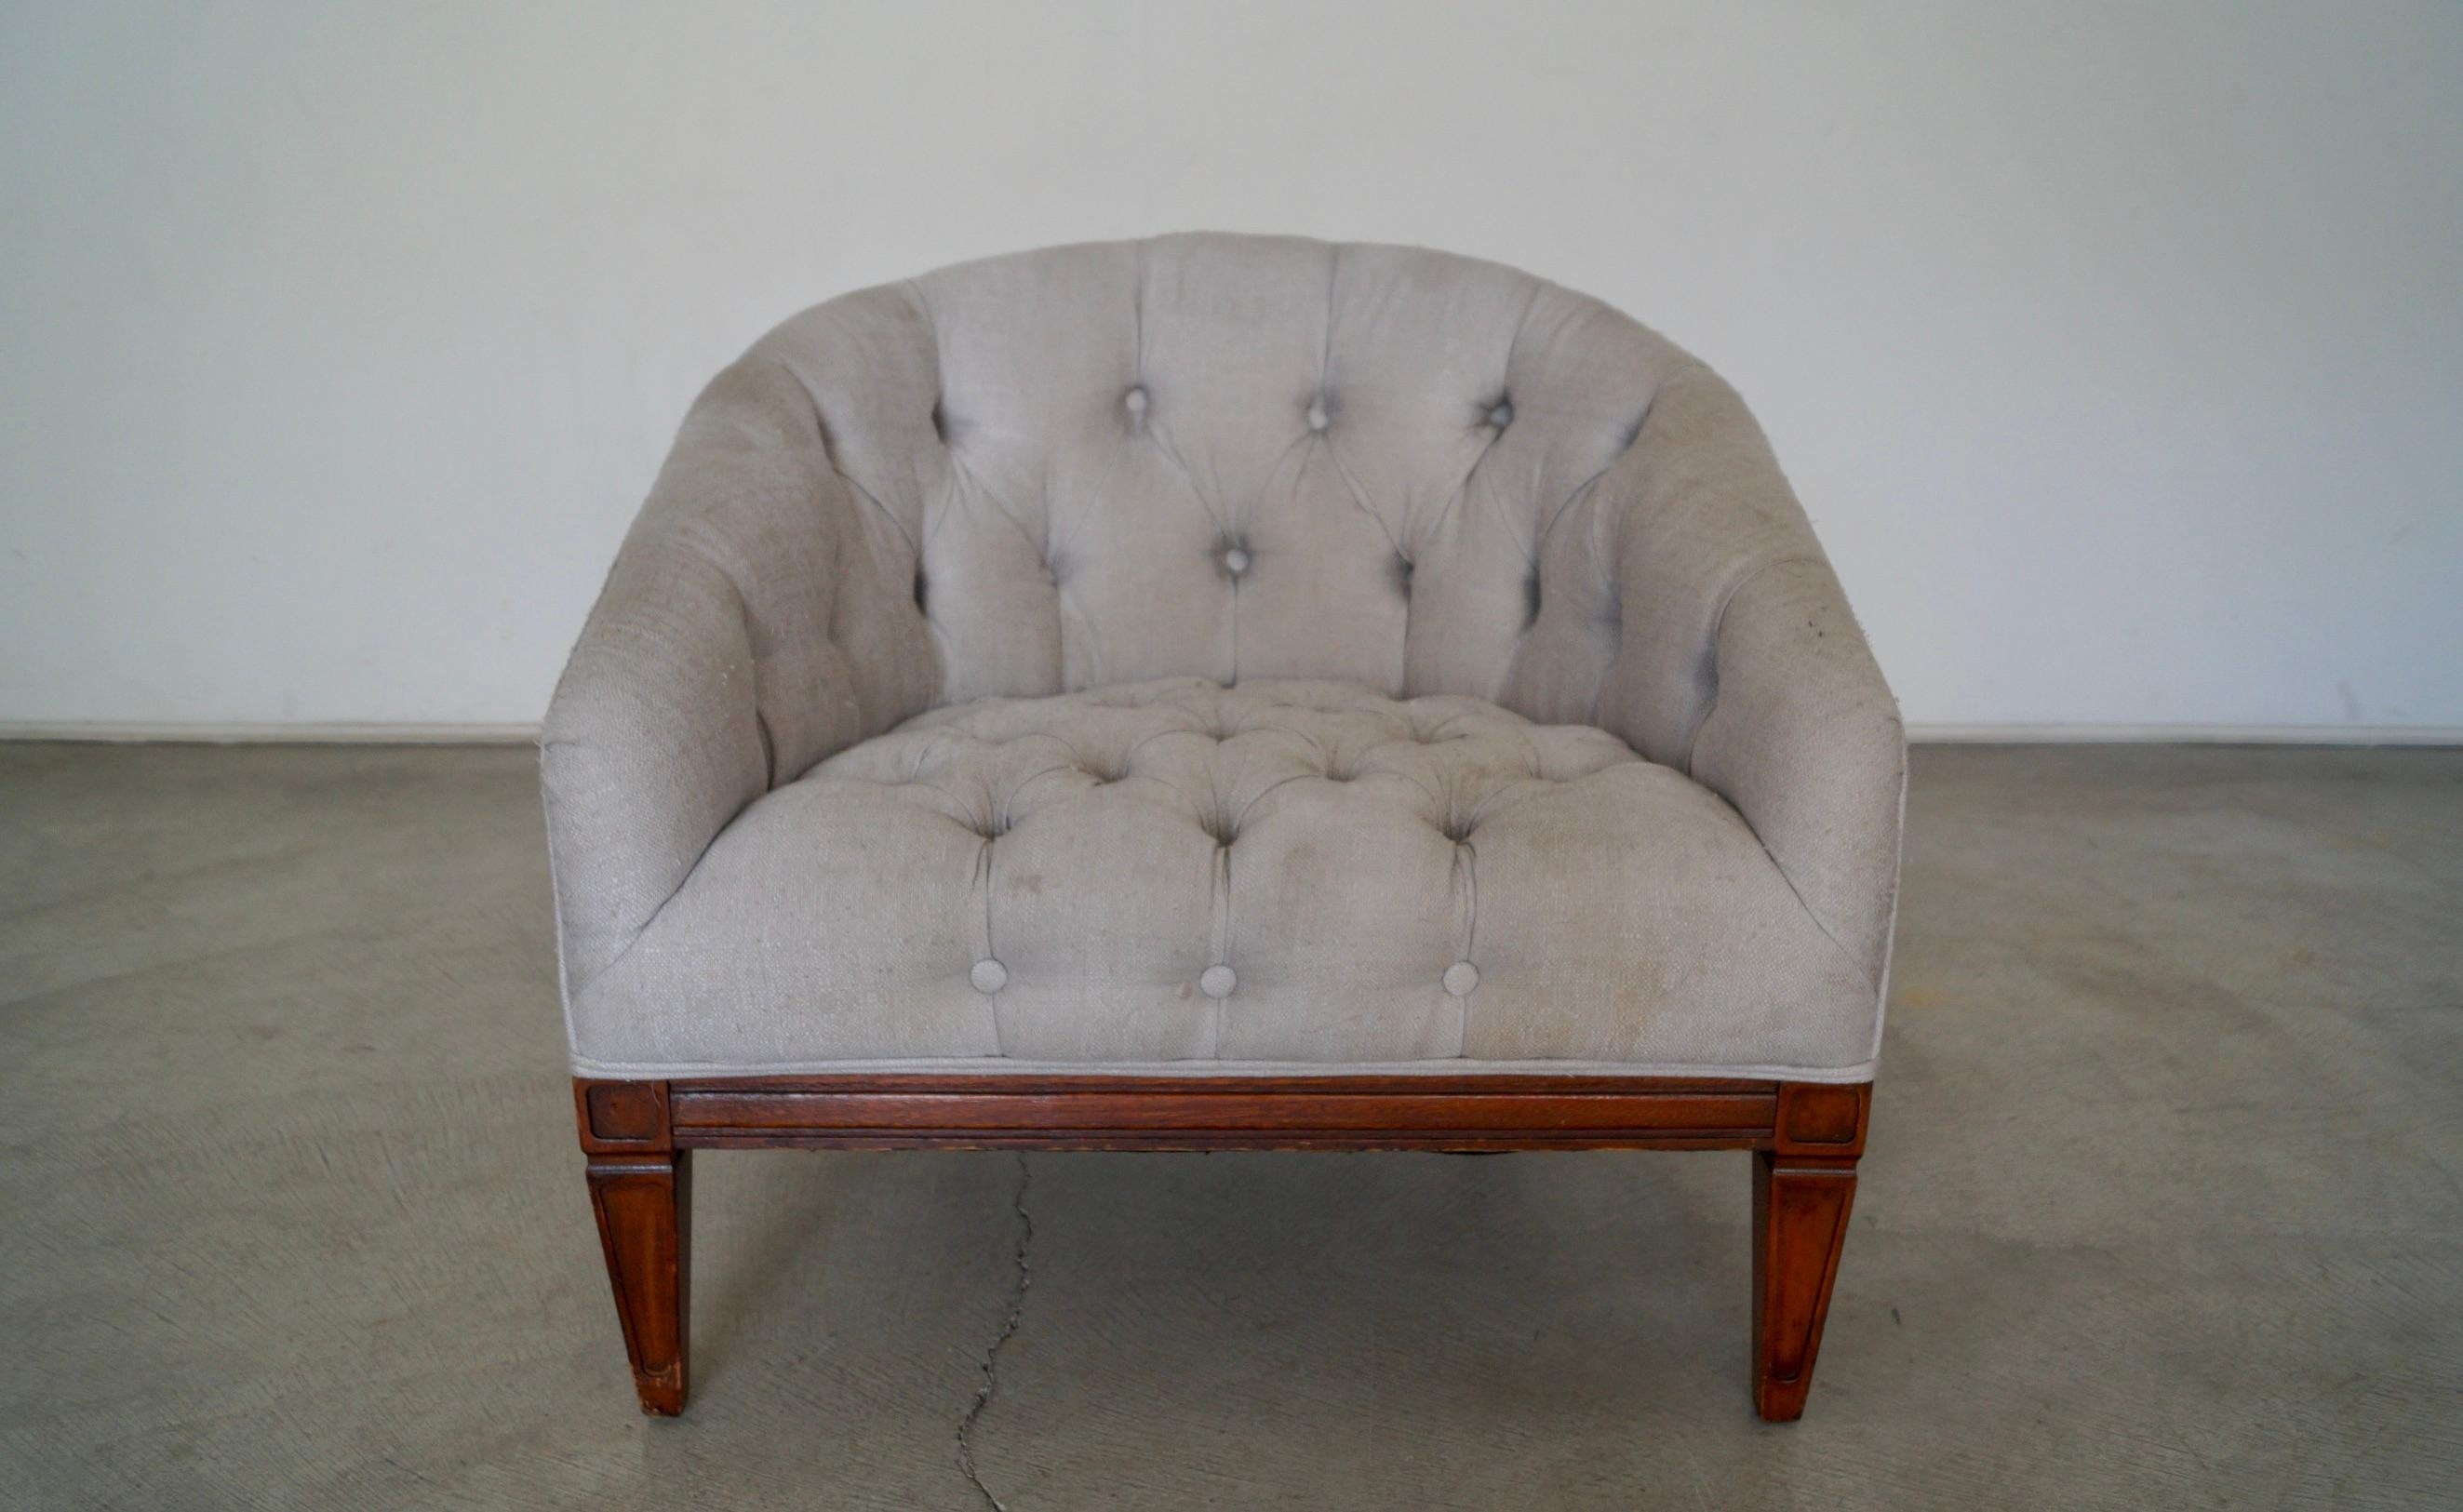 1960's Mid-Century Modern Barrel Back Lounge Chair In Fair Condition For Sale In Burbank, CA